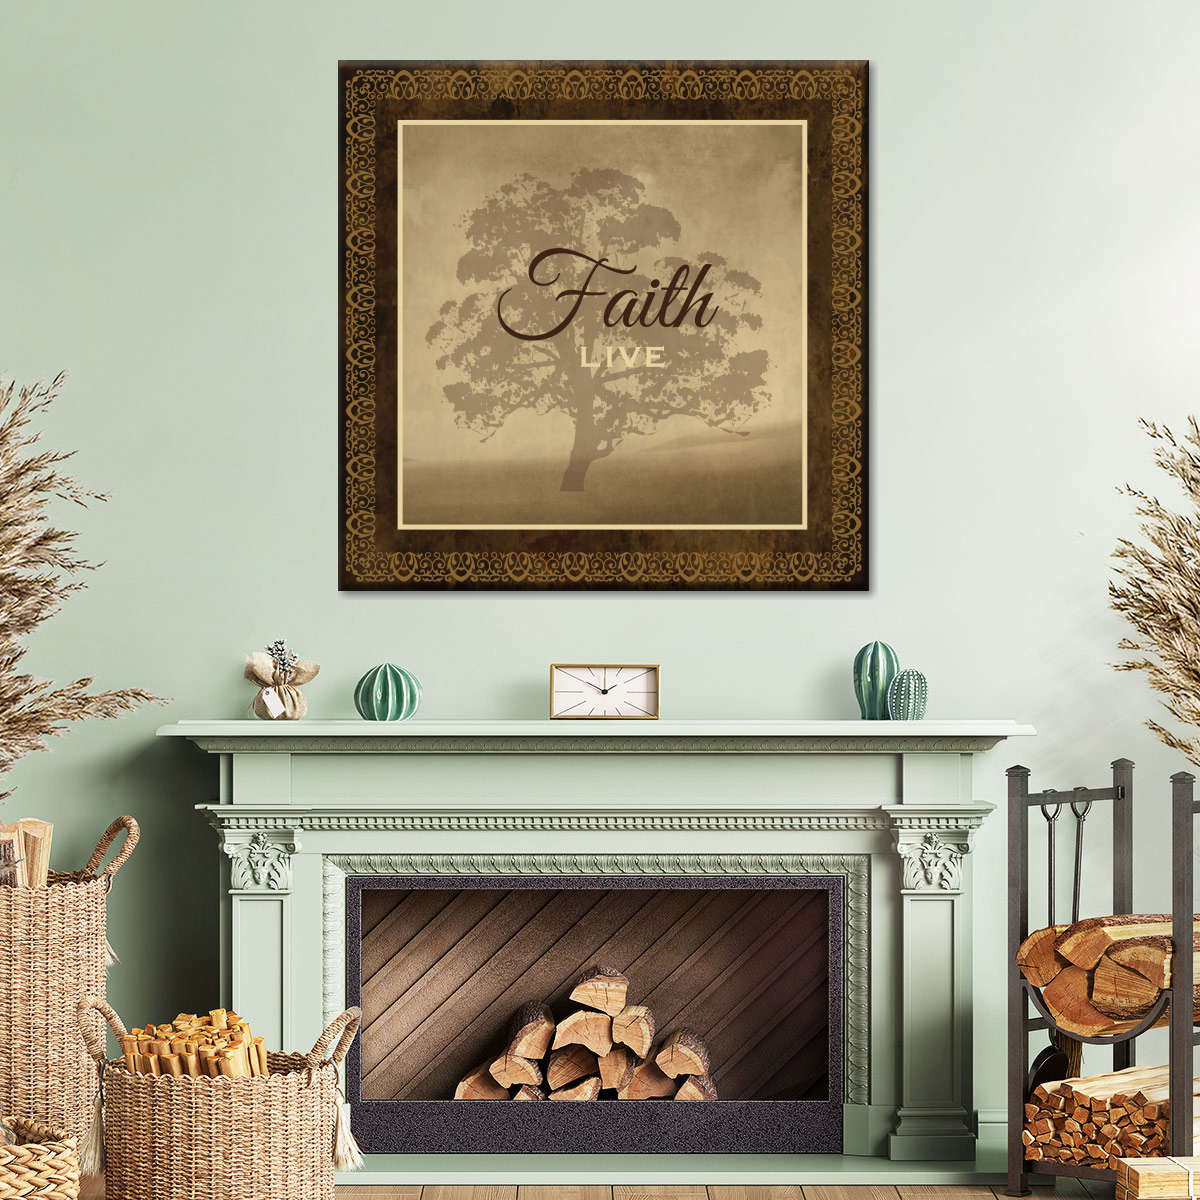 Faith Live Square Canvas Wall Art - Bible Verse Wall Art Canvas - Religious Wall Hanging